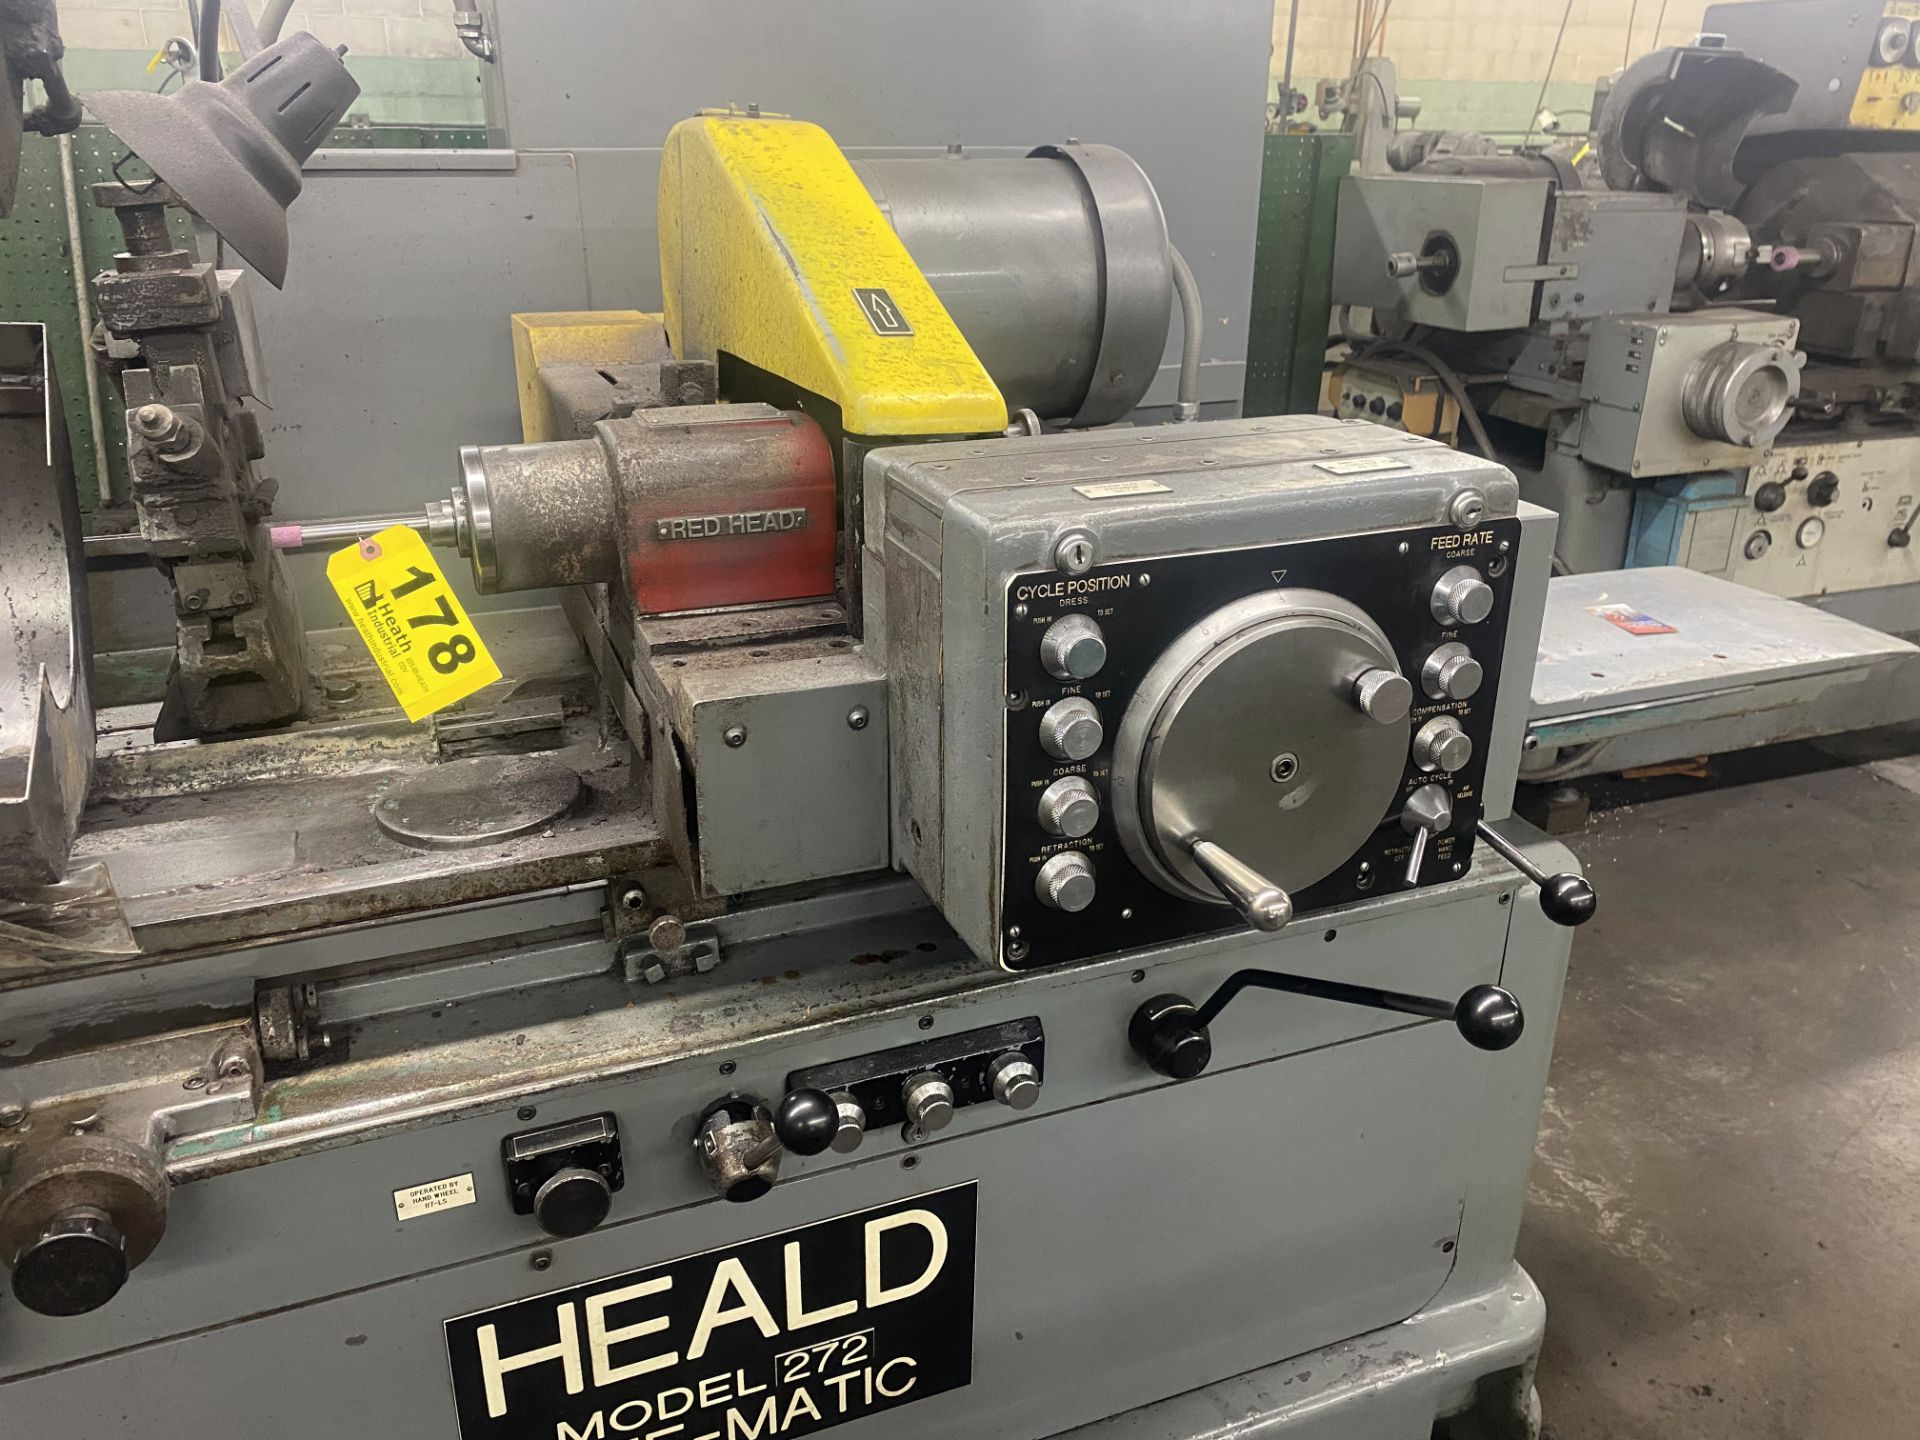 HEALD MODELL 272 SIZE-MATIC INTERNAL GRINDER, S/N 37750, 9" 3-JAW CHUCK, RED HEAD SPINDLE, TARRY - Image 3 of 6